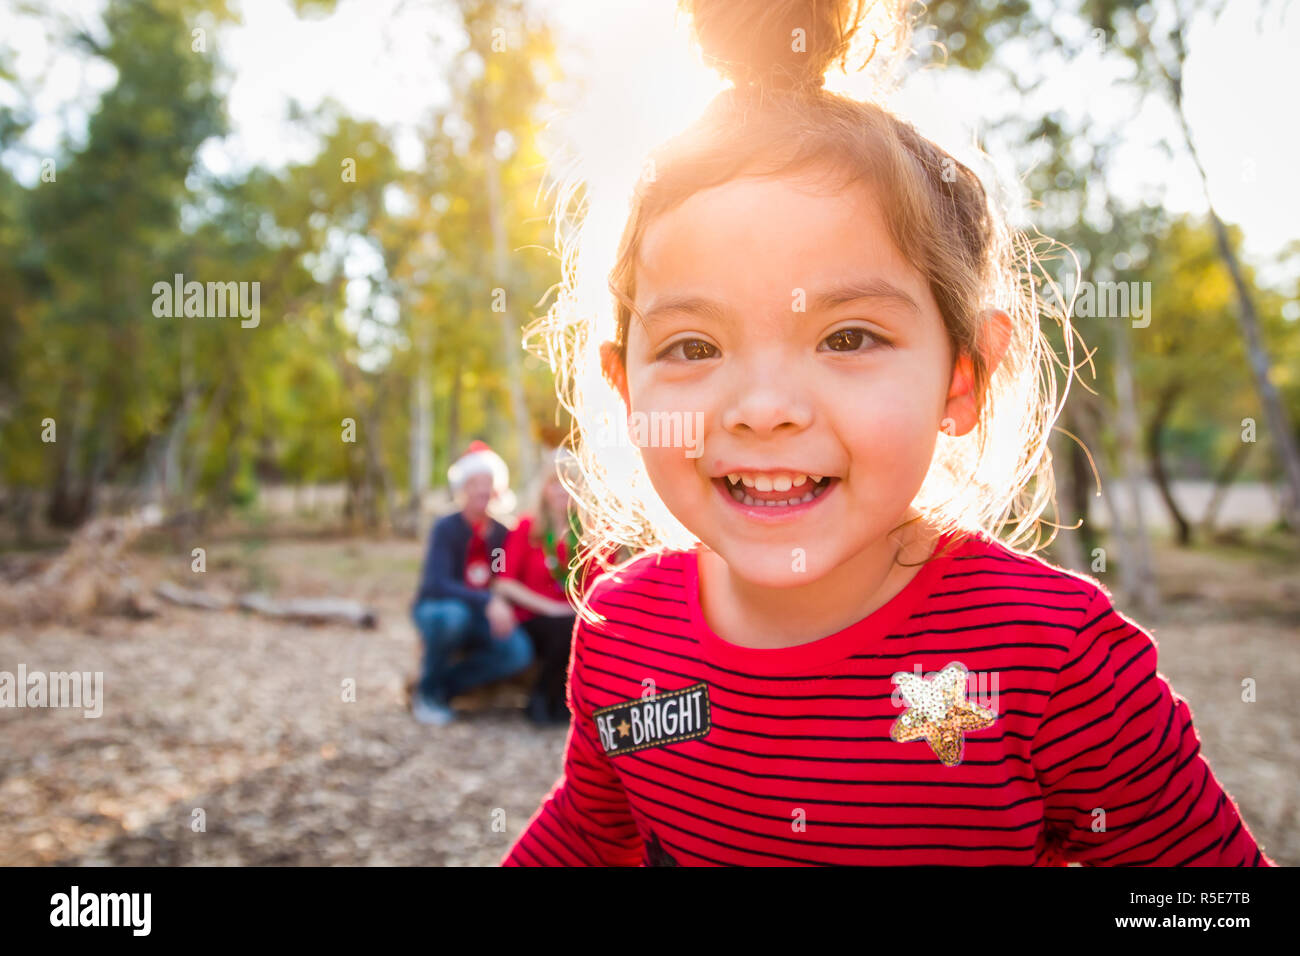 Cute Mixed Race Baby Girl Christmas Portrait With Family Behind Outdoors. Stock Photo